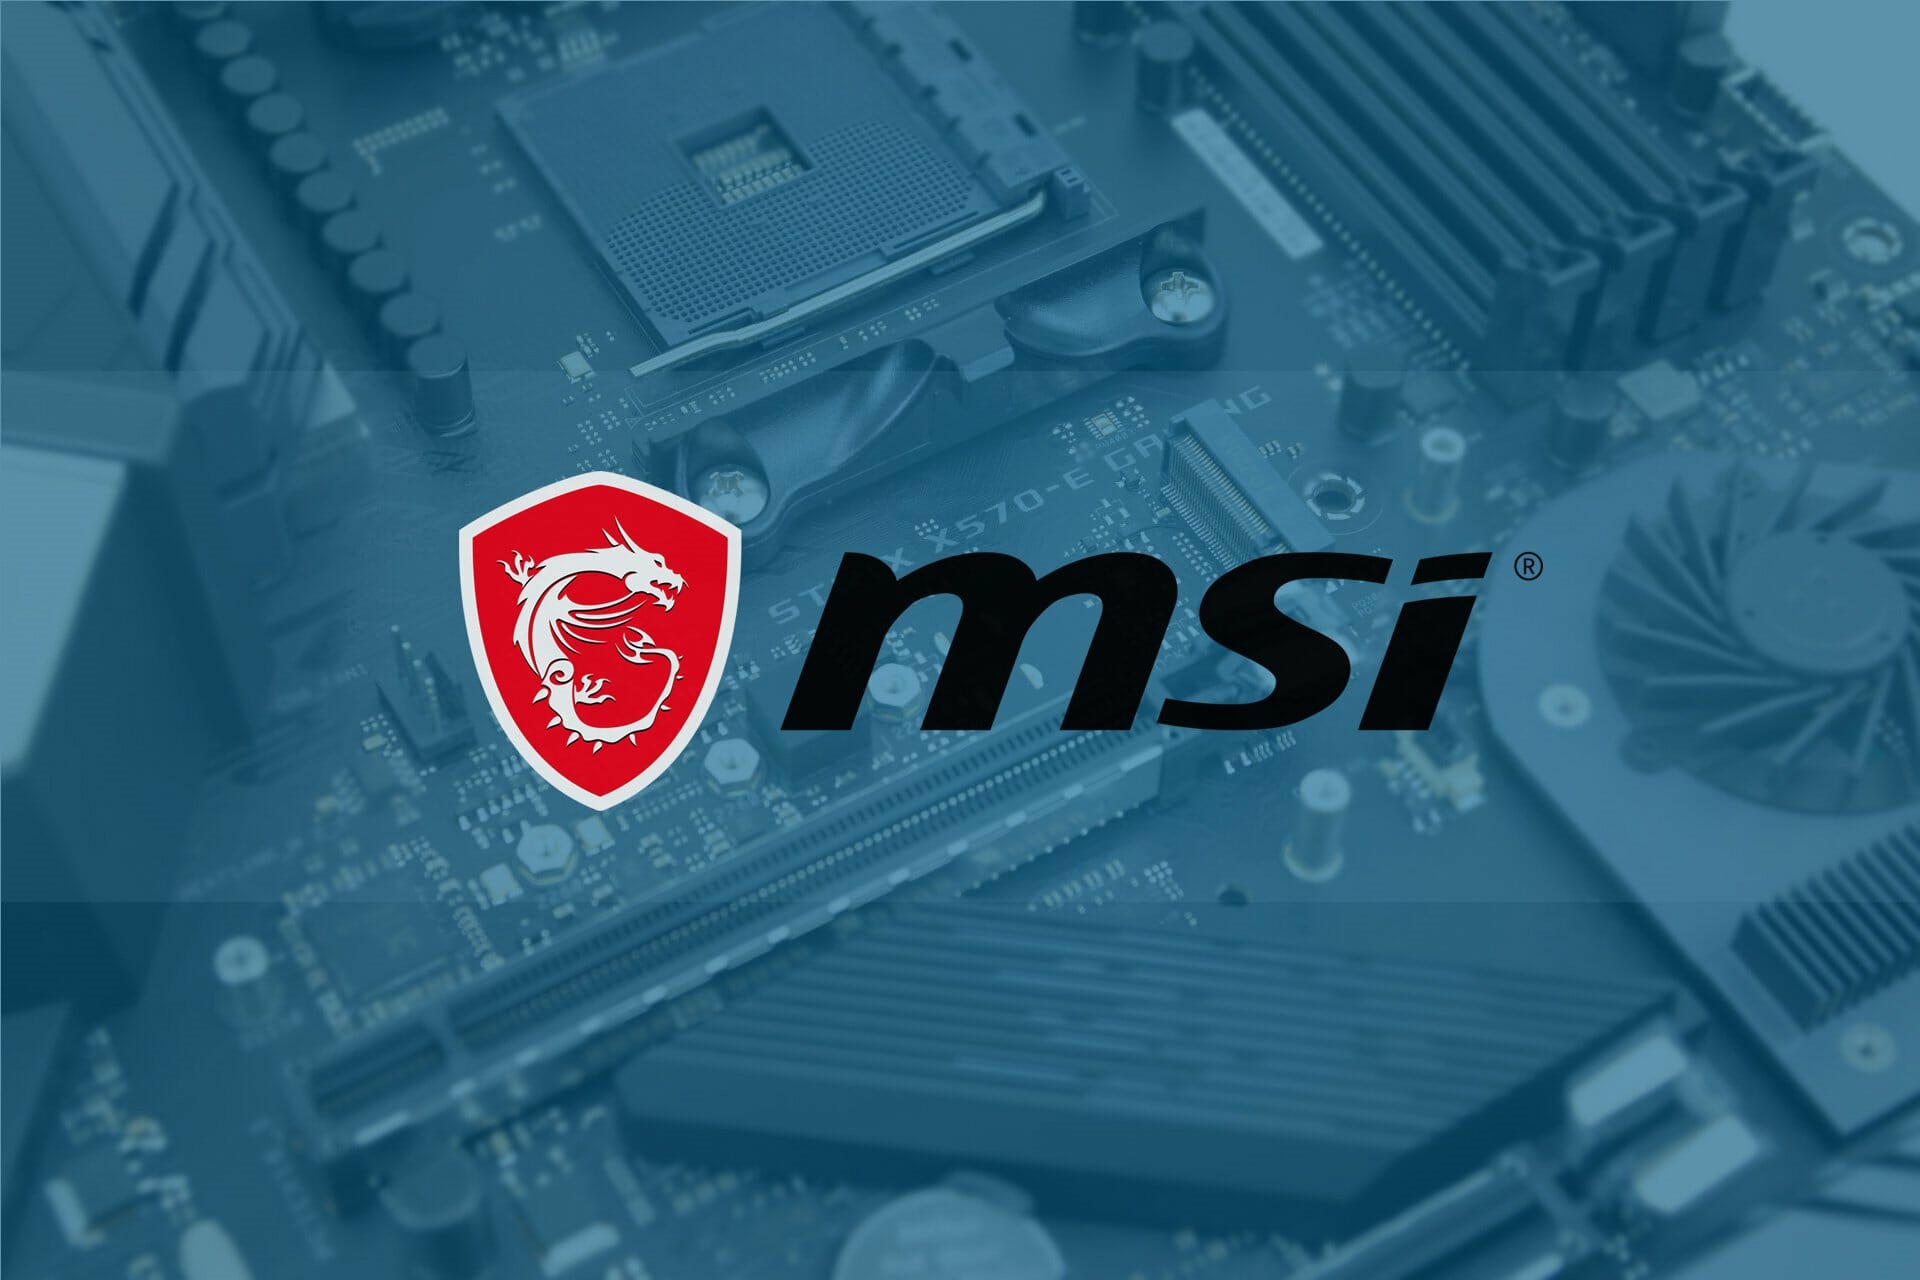 how to install msi motherboard drivers without cd